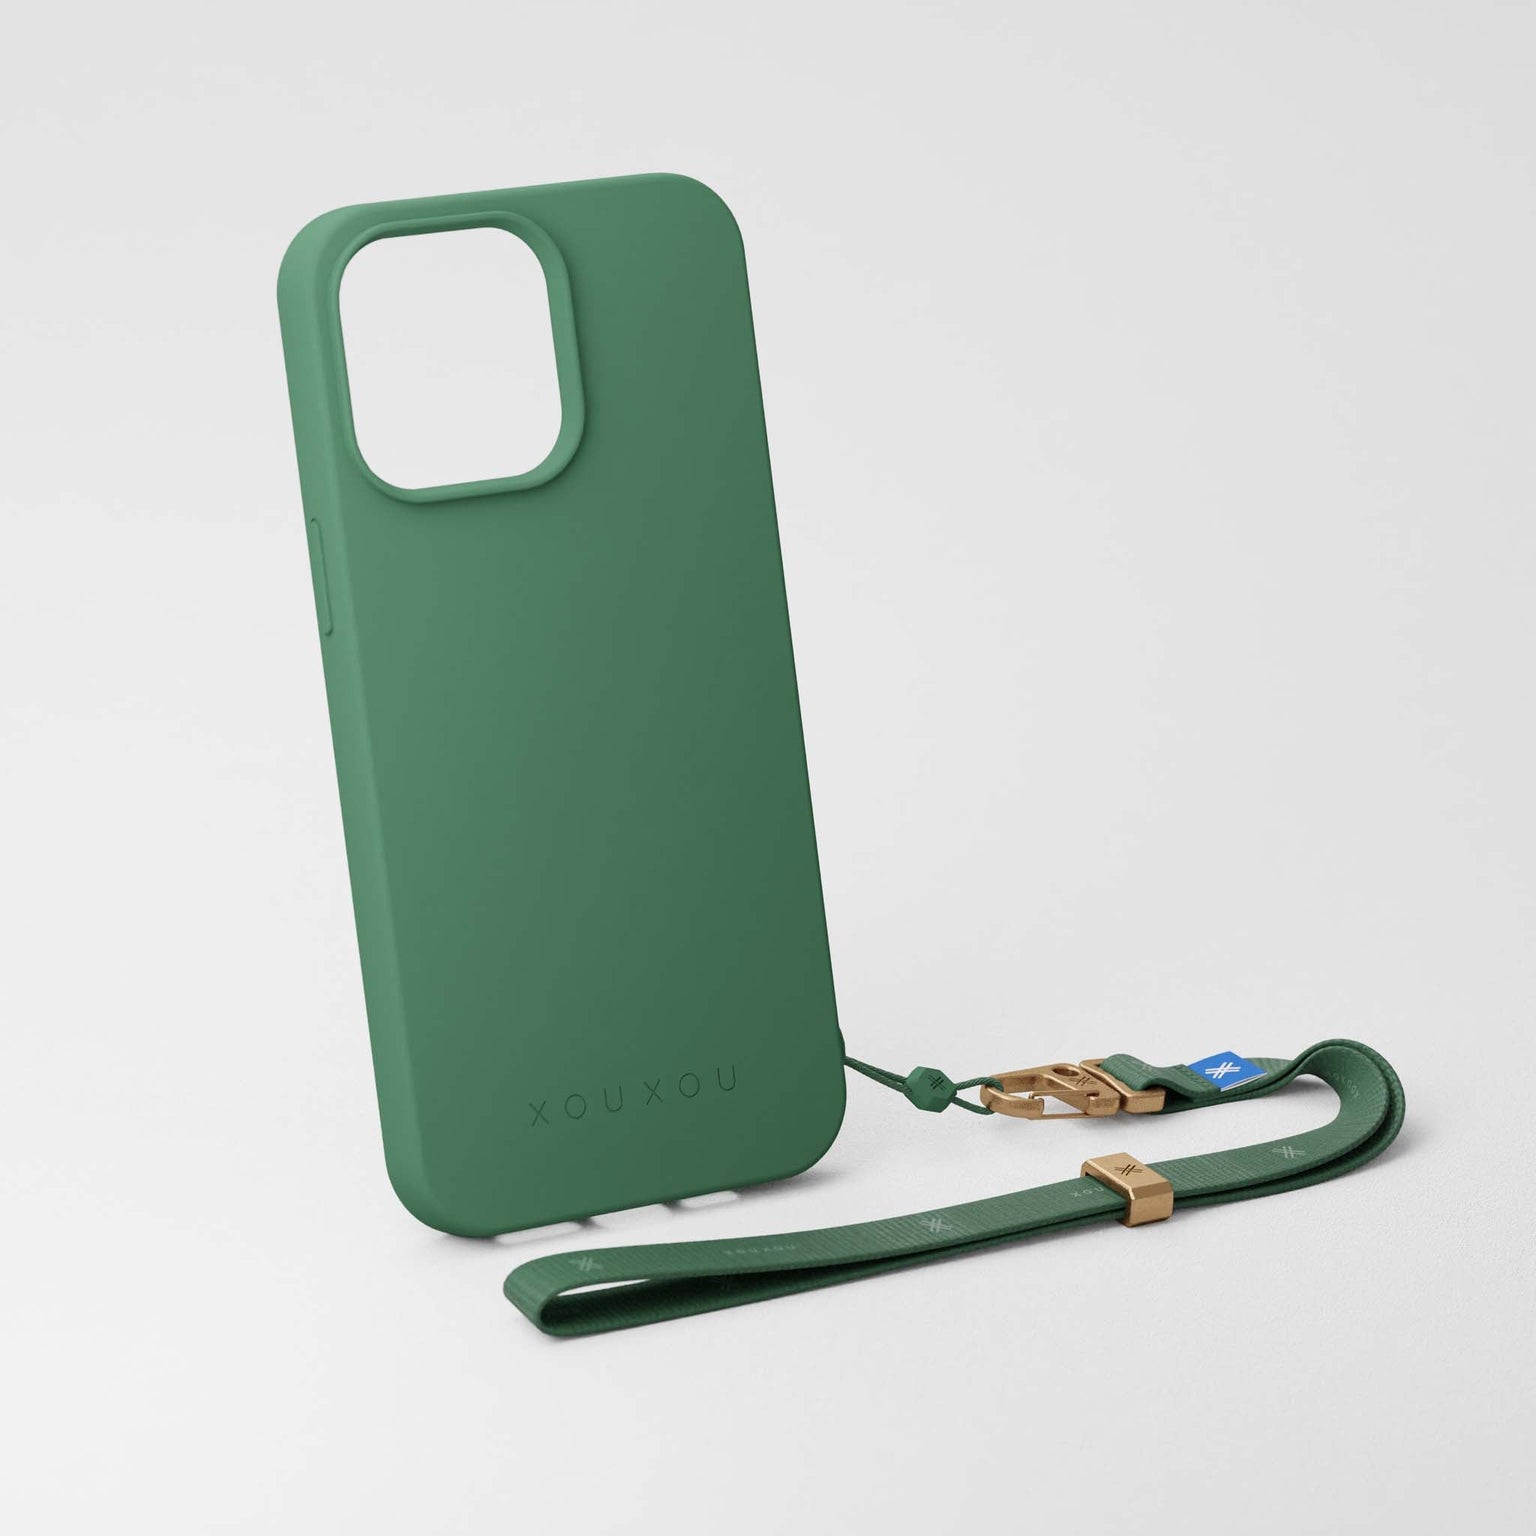 iPhone Case in Sage green with Wrist Strap | XOUXOU